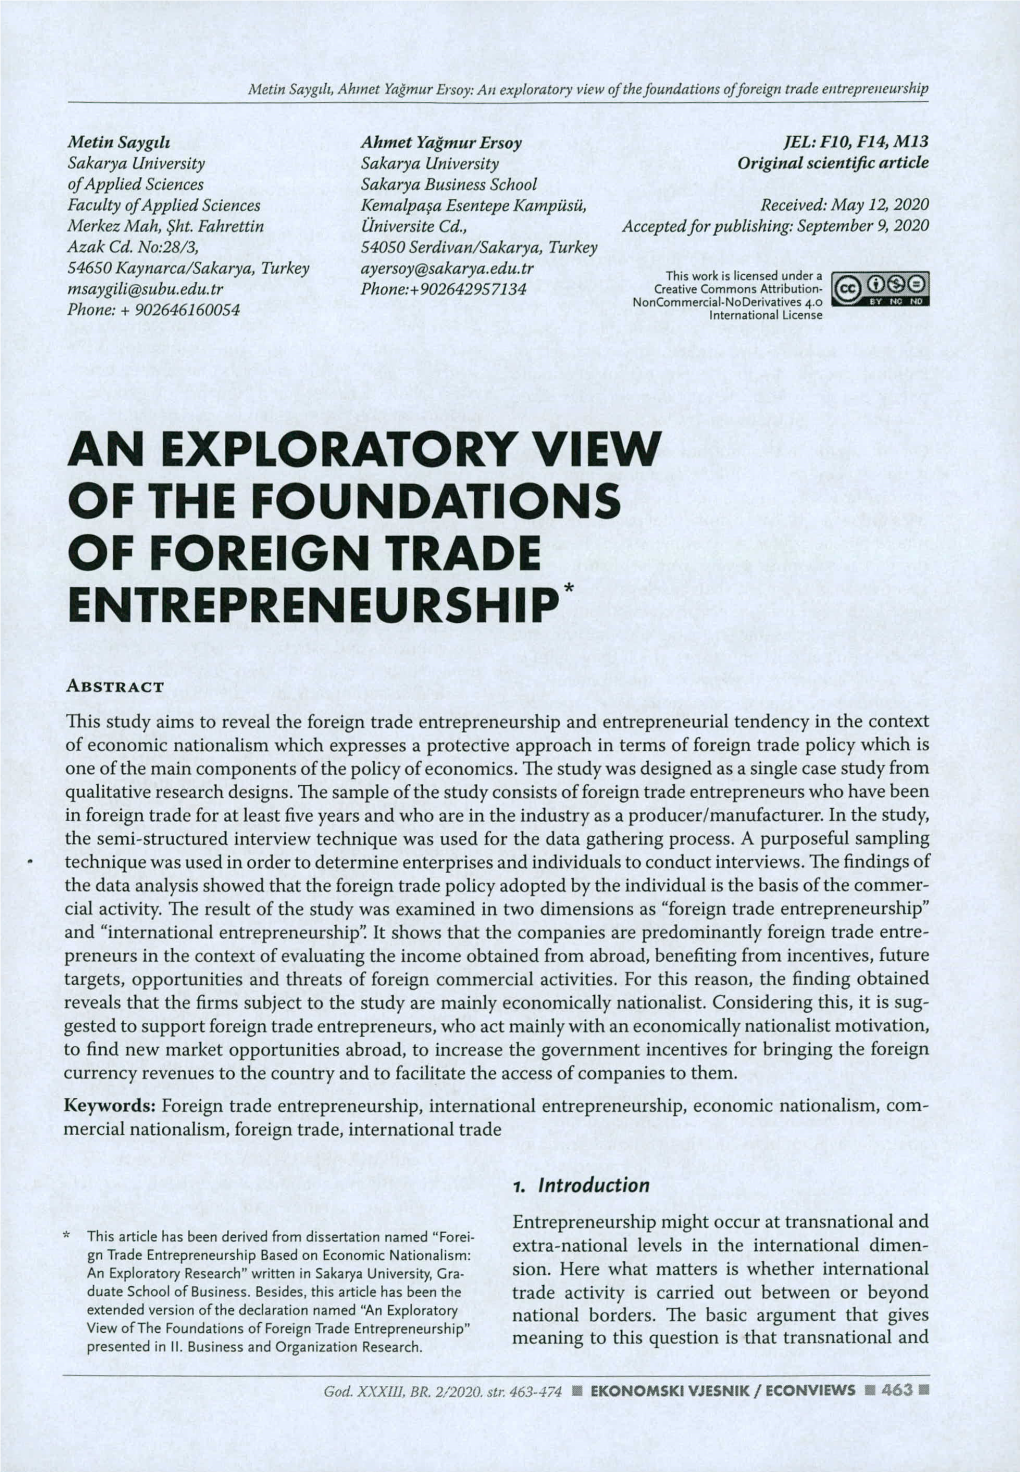 Of the Foundations of Foreign Trade Entrepreneurship*